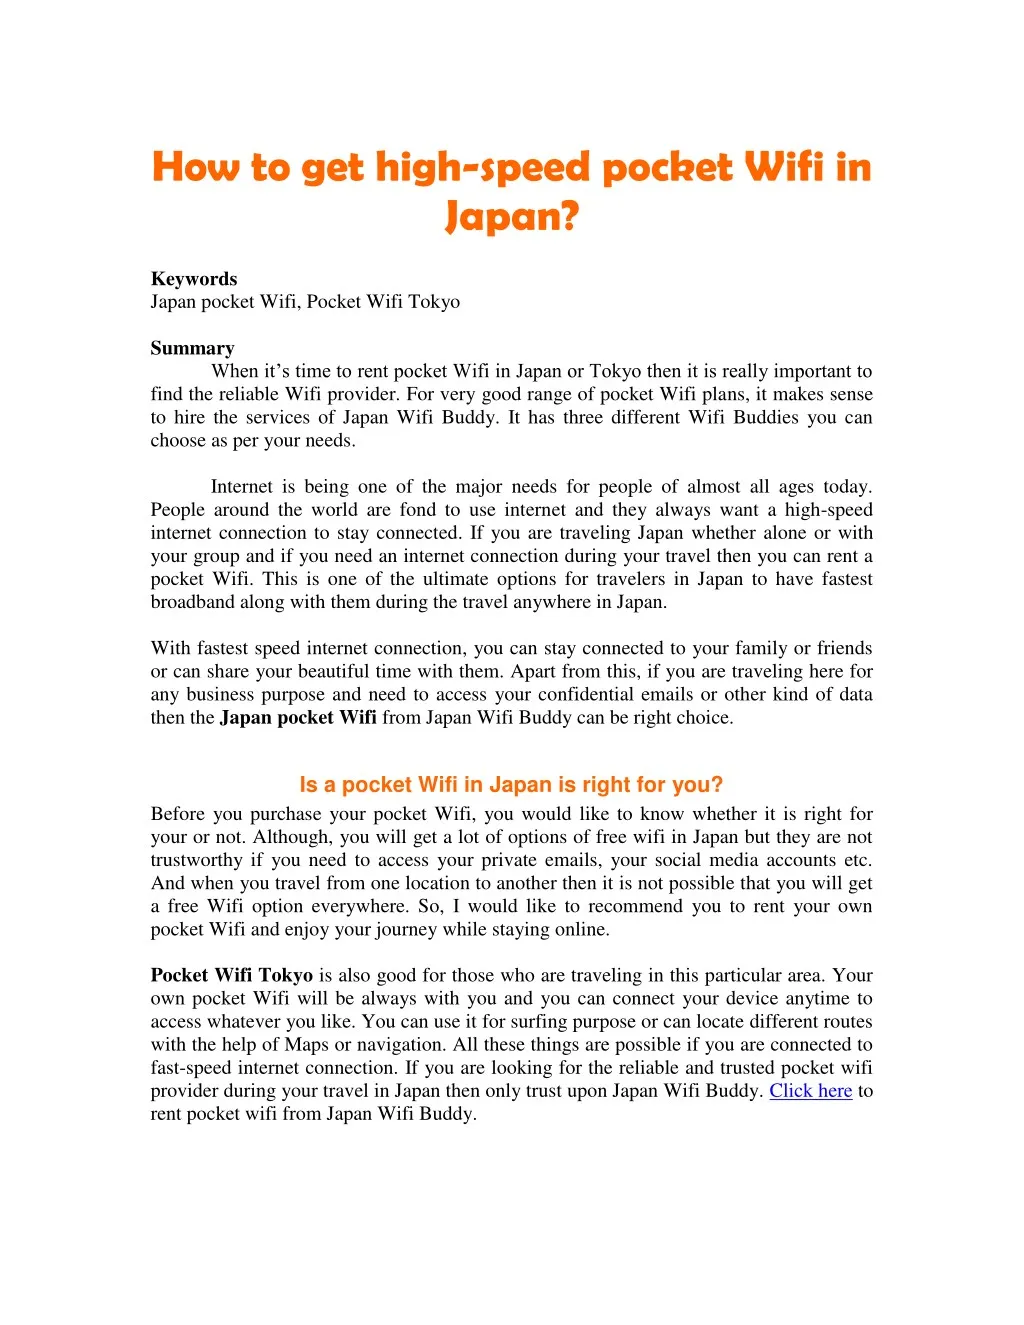 how to get high speed pocket wifi in japan